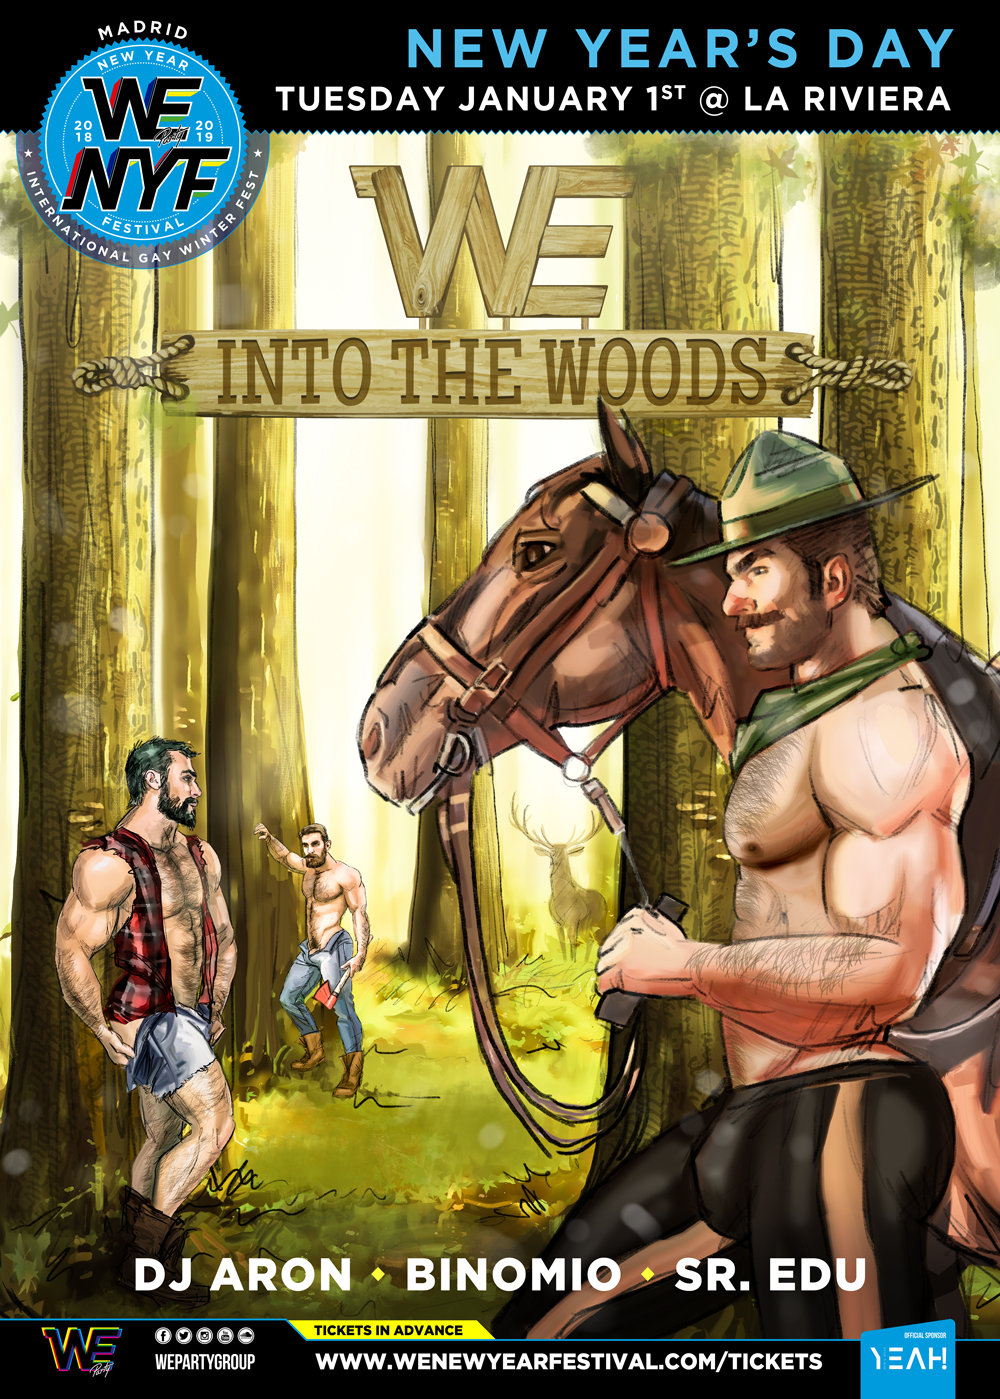 01-01-we-into-the-woods-normal-vip-5bd83